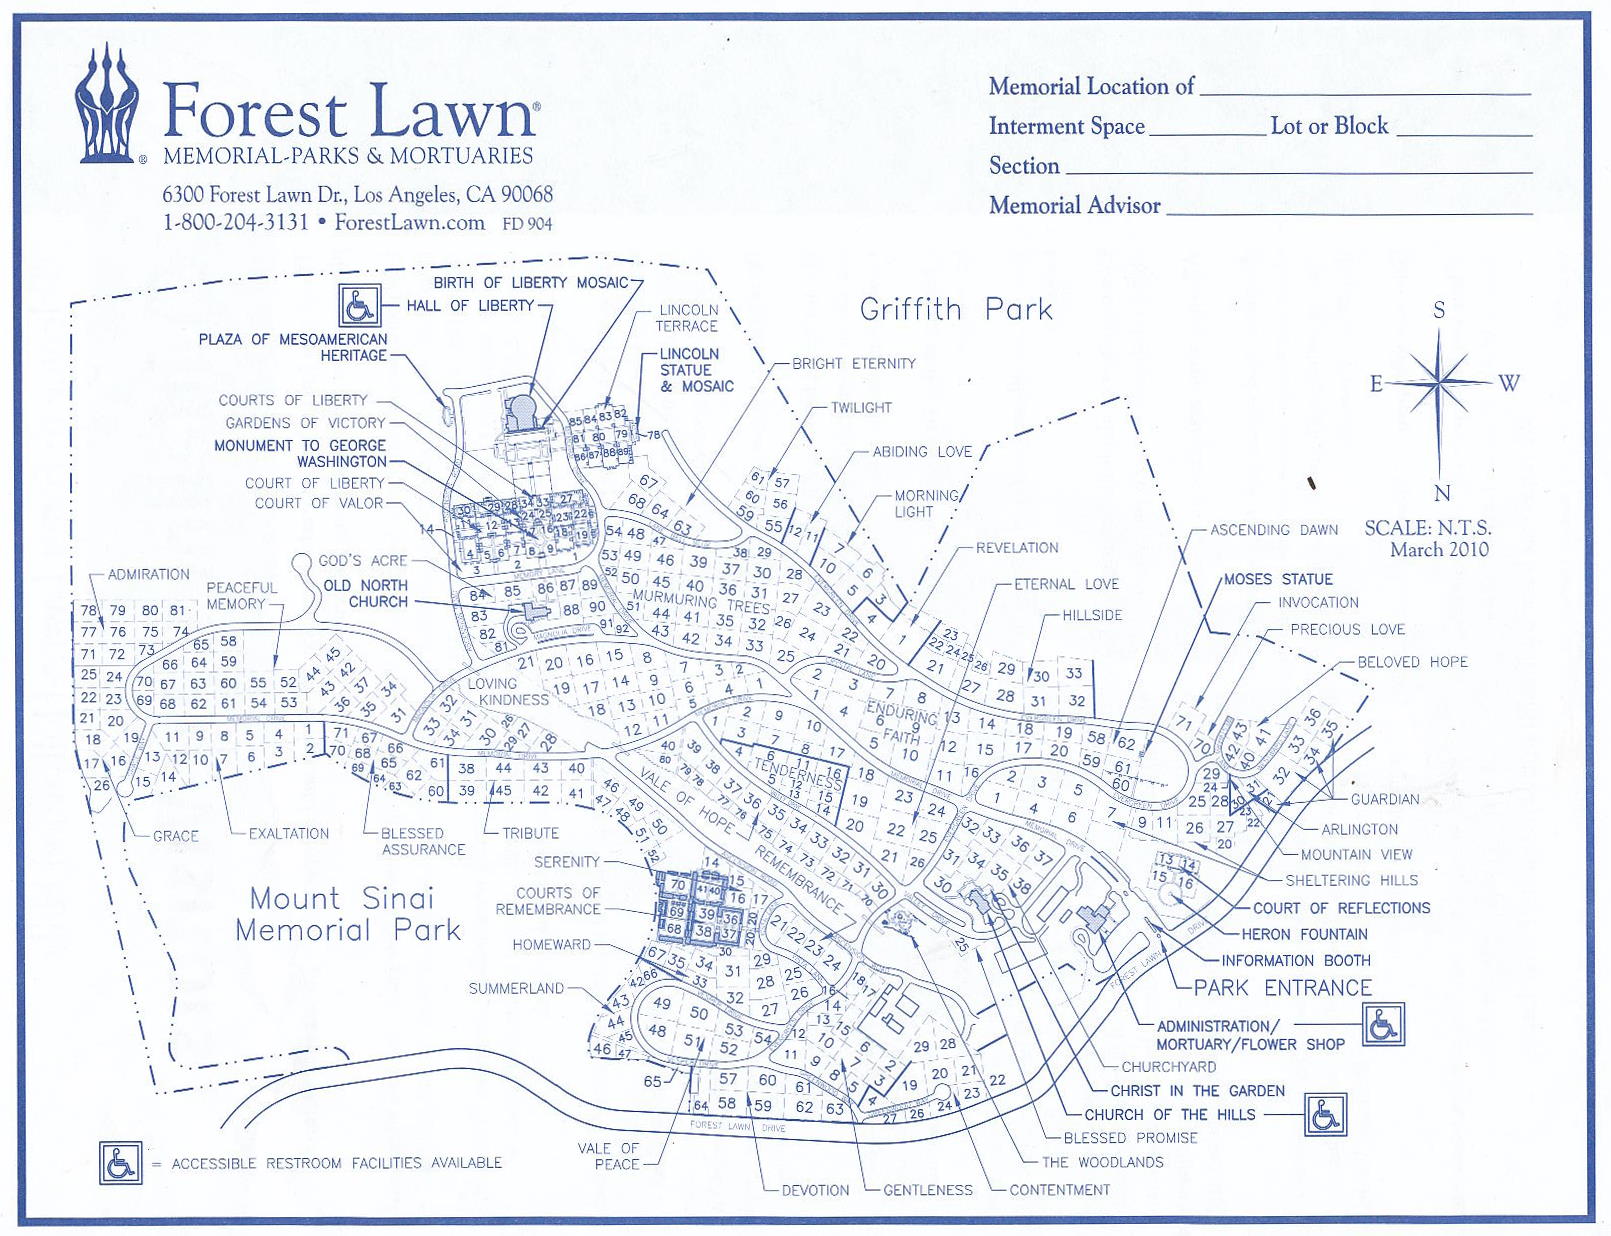 Map of Forest Lawn Memorial Park - Hollywood Hill in Los Angeles CA